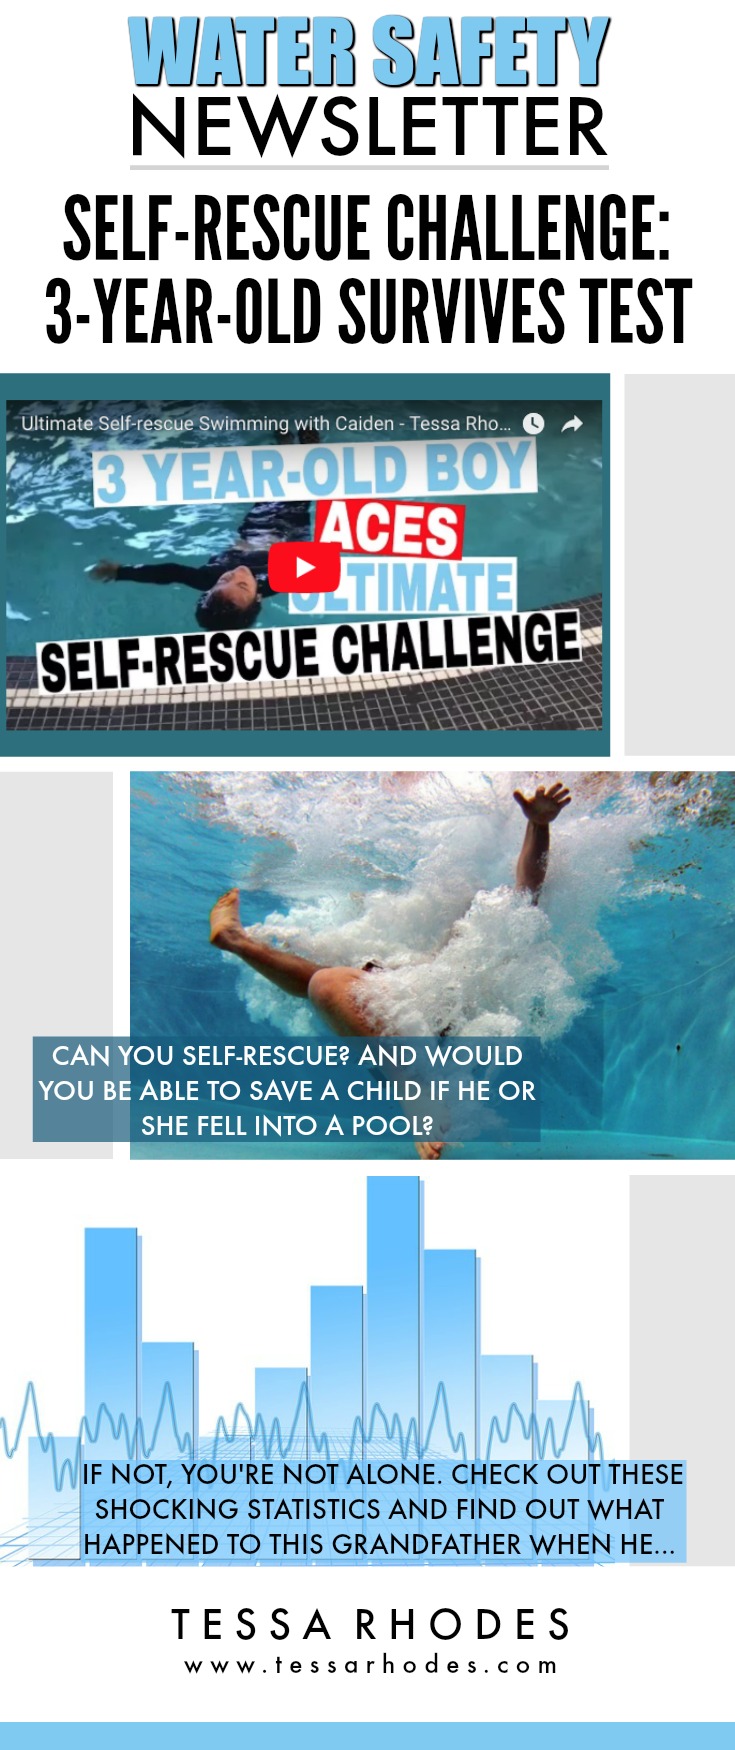 Three and a half year old Caiden passed the ultimate self-rescue challenge. Which means that he now has the life-saving skills that allow him to self-rescue if he ever fell into a pool fully clothed. CLICK THROUGH to read the full post and learn what can be done to prevent drowning. (water safety, drowning prevention, drowning statistics)